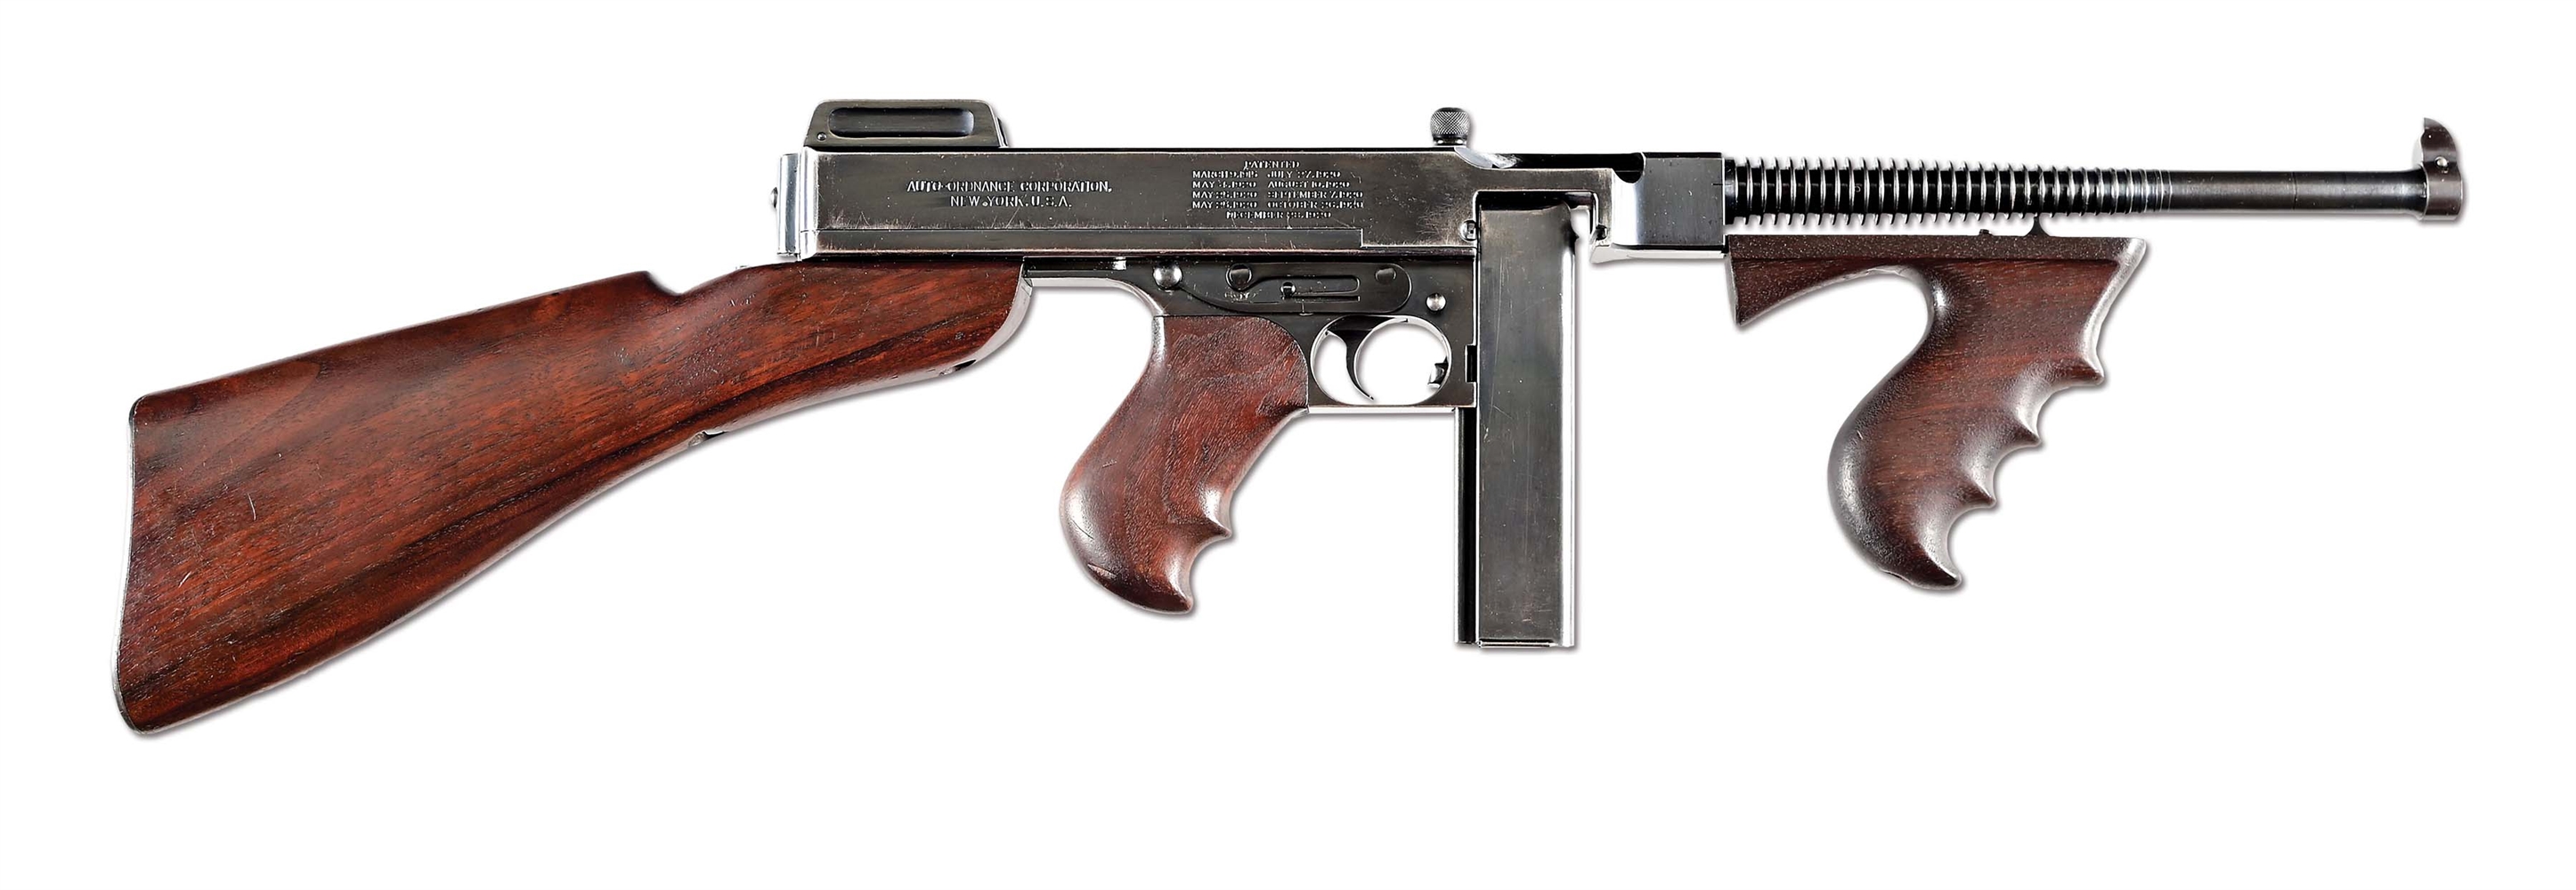 (N) SPECTACULAR HISTORIC HIGH ORIGINAL CONDITION LOW SERIAL NUMBER COLT 1921A THOMPSON 1921 MACHINE GUN 1 OF 5 SHIPPED TO ENGLAND IN 1921 (CURIO AND RELIC).